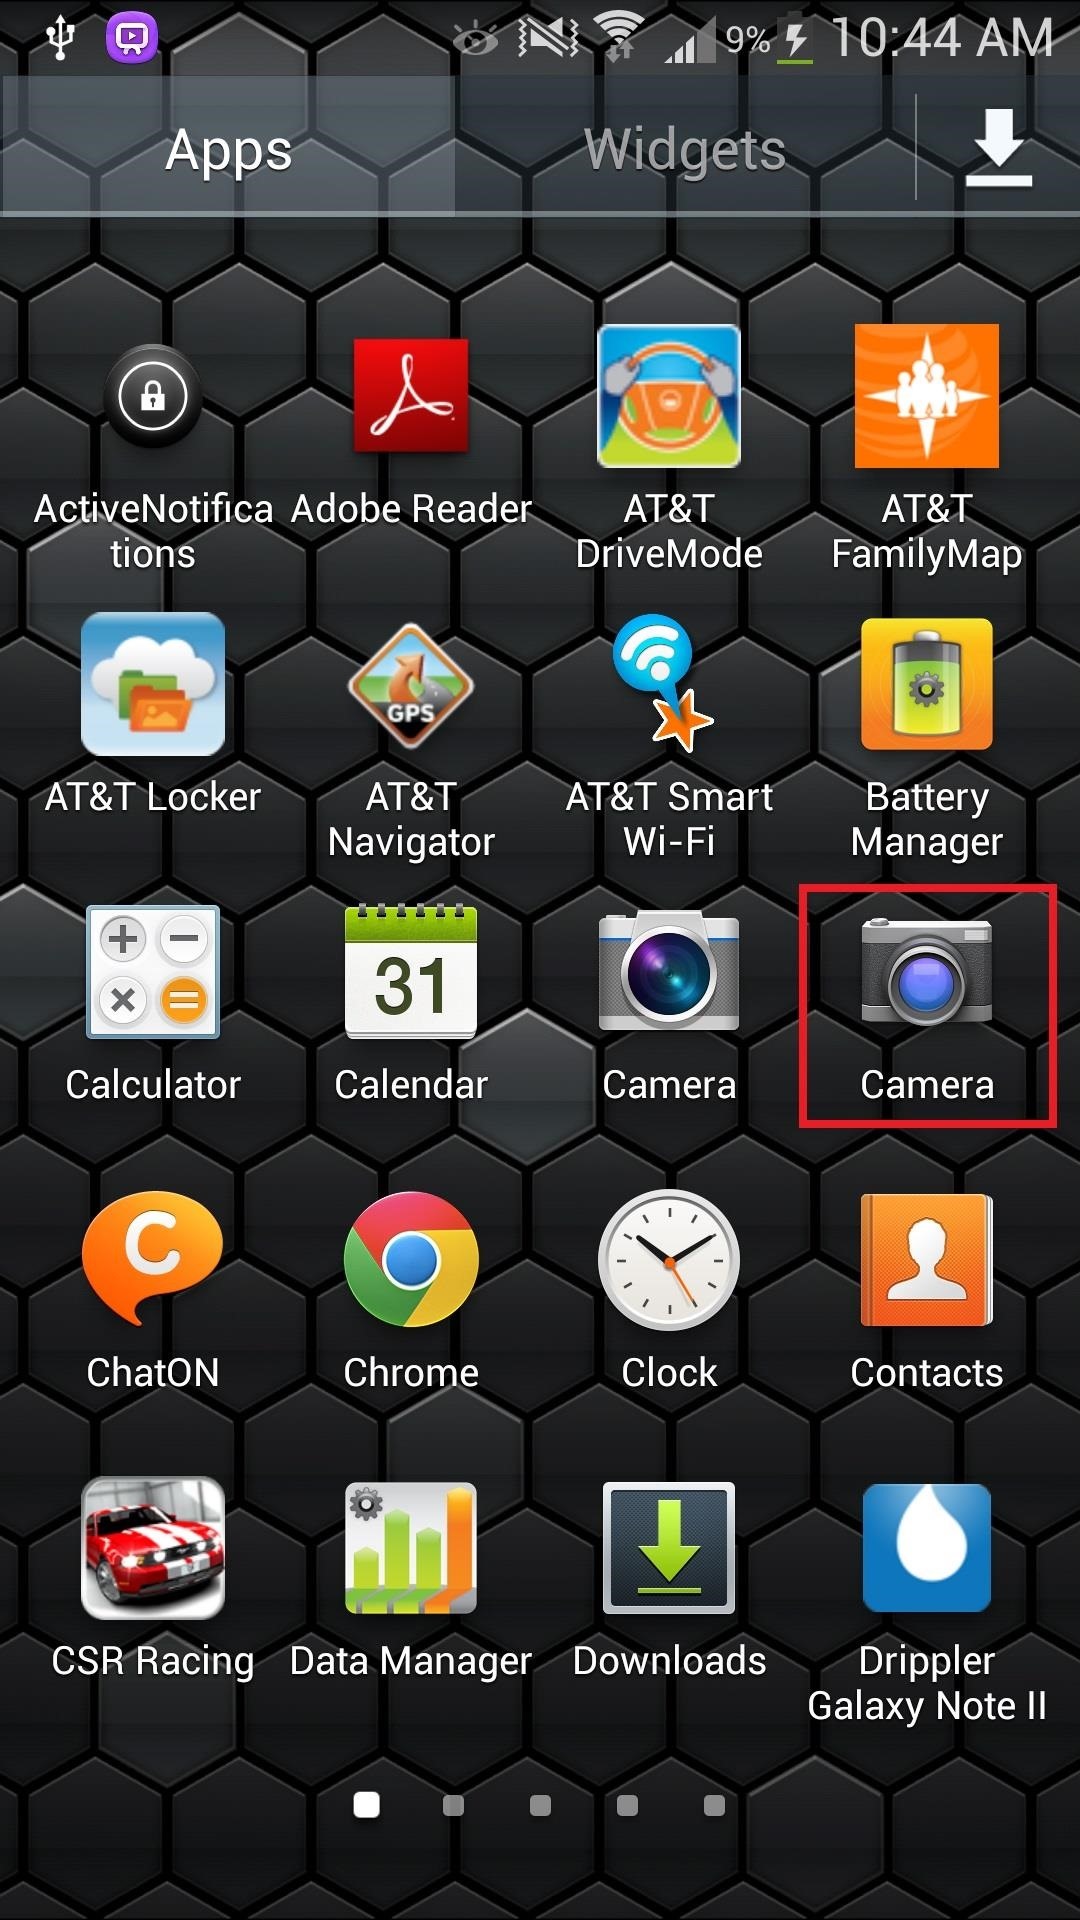 How to Get the Google Play Edition Camera & Gallery on a TouchWiz Based Samsung Galaxy S4